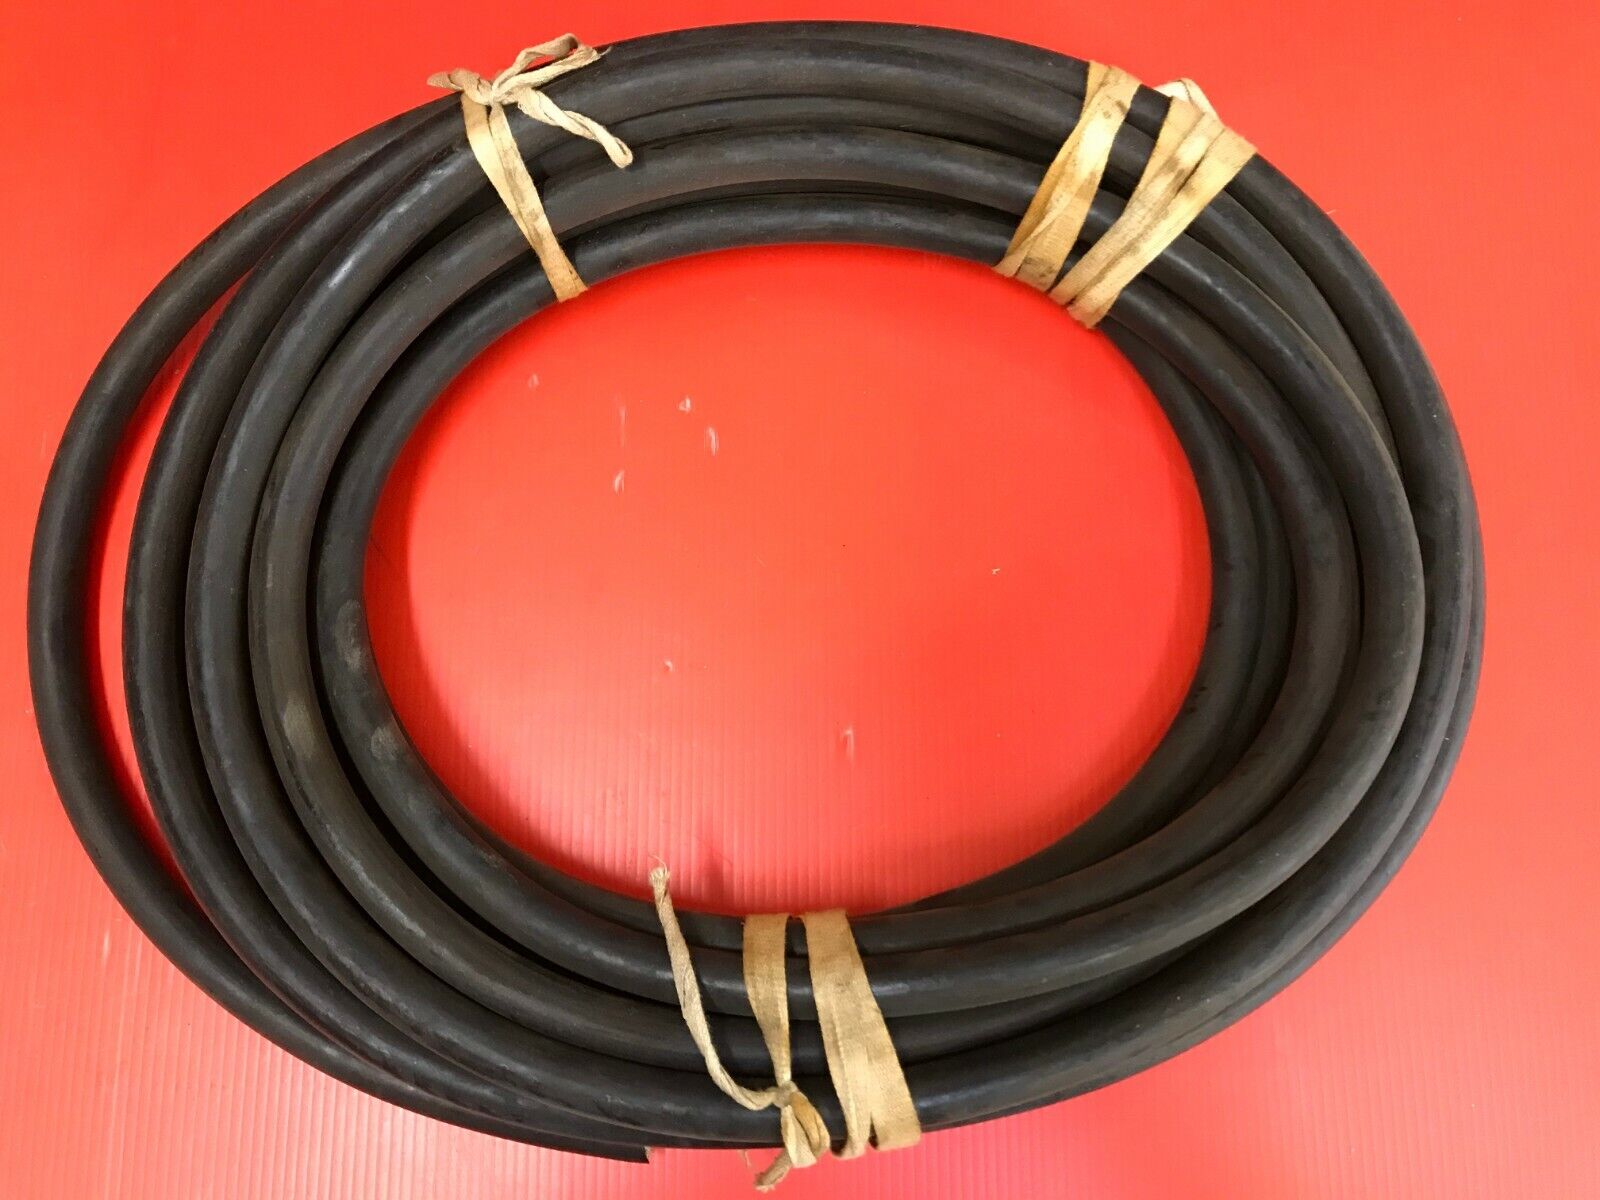 WM-46/U WITH 10 CONDUCTOR SHIELDED CABLE FOR  MILITARY VEHICLE RADIO & INTERCOMS